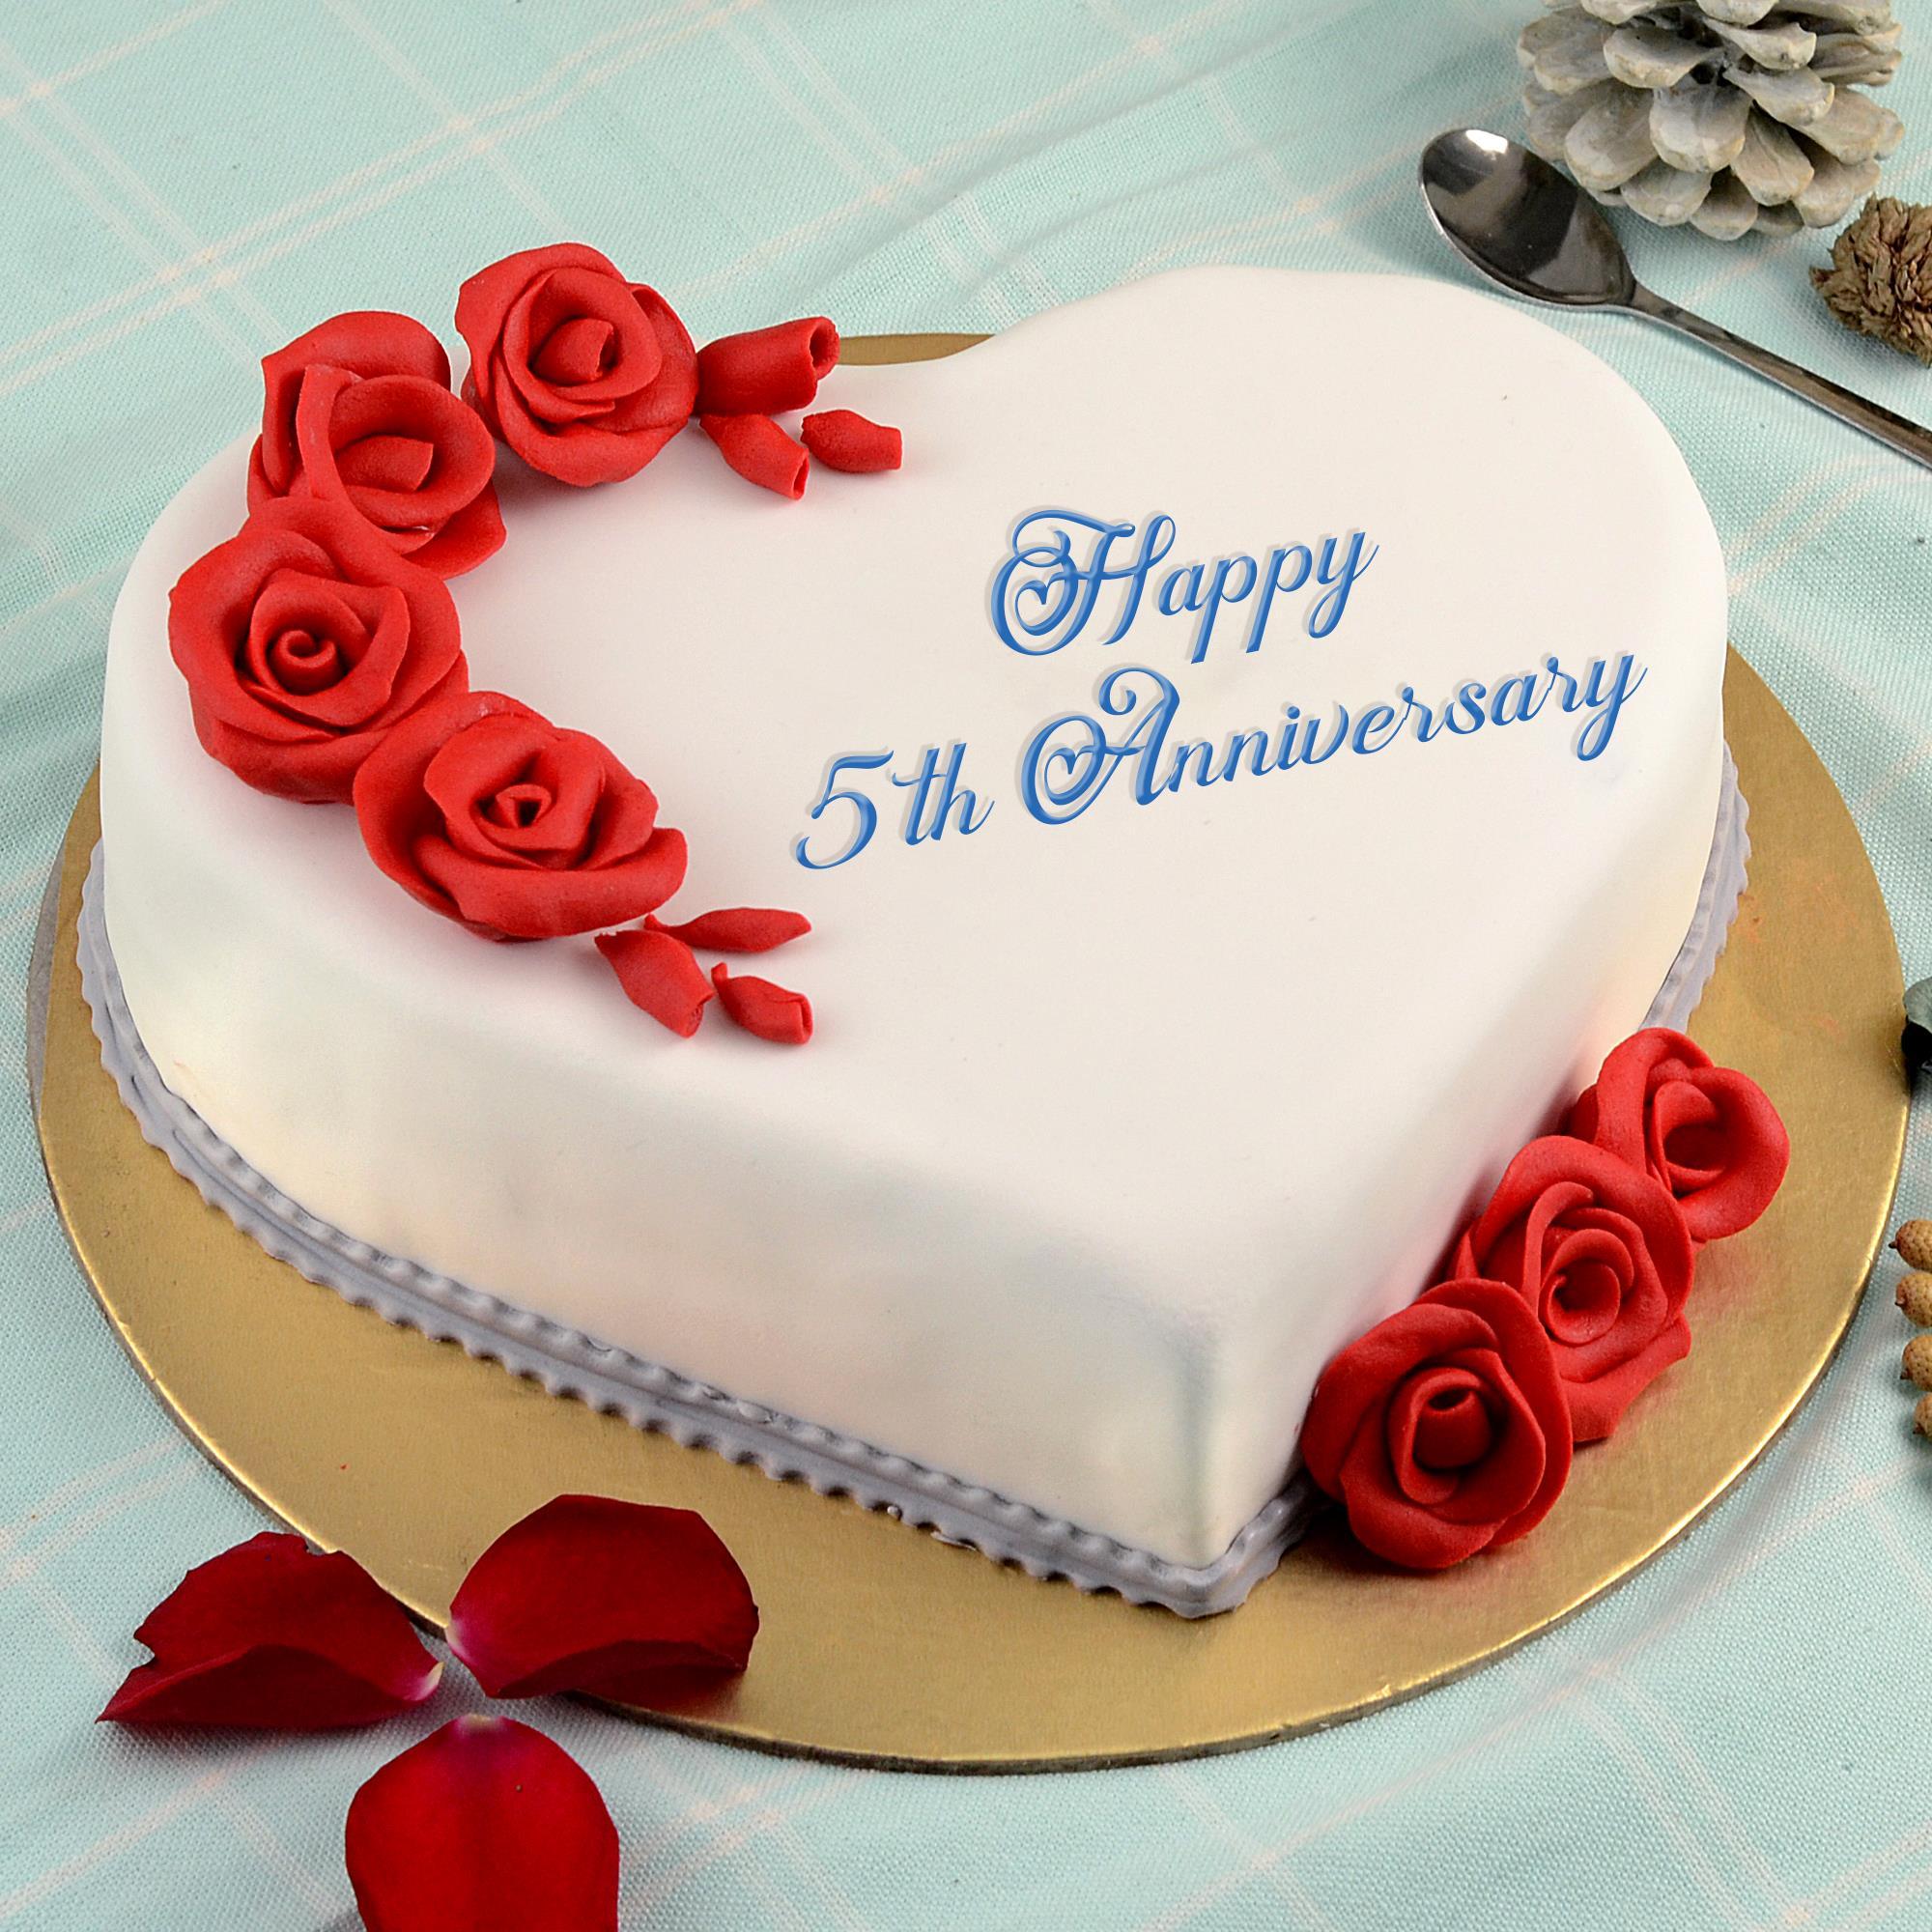 5th Anniversary Cakes: Order 5th Wedding Anniversary Cakes Online